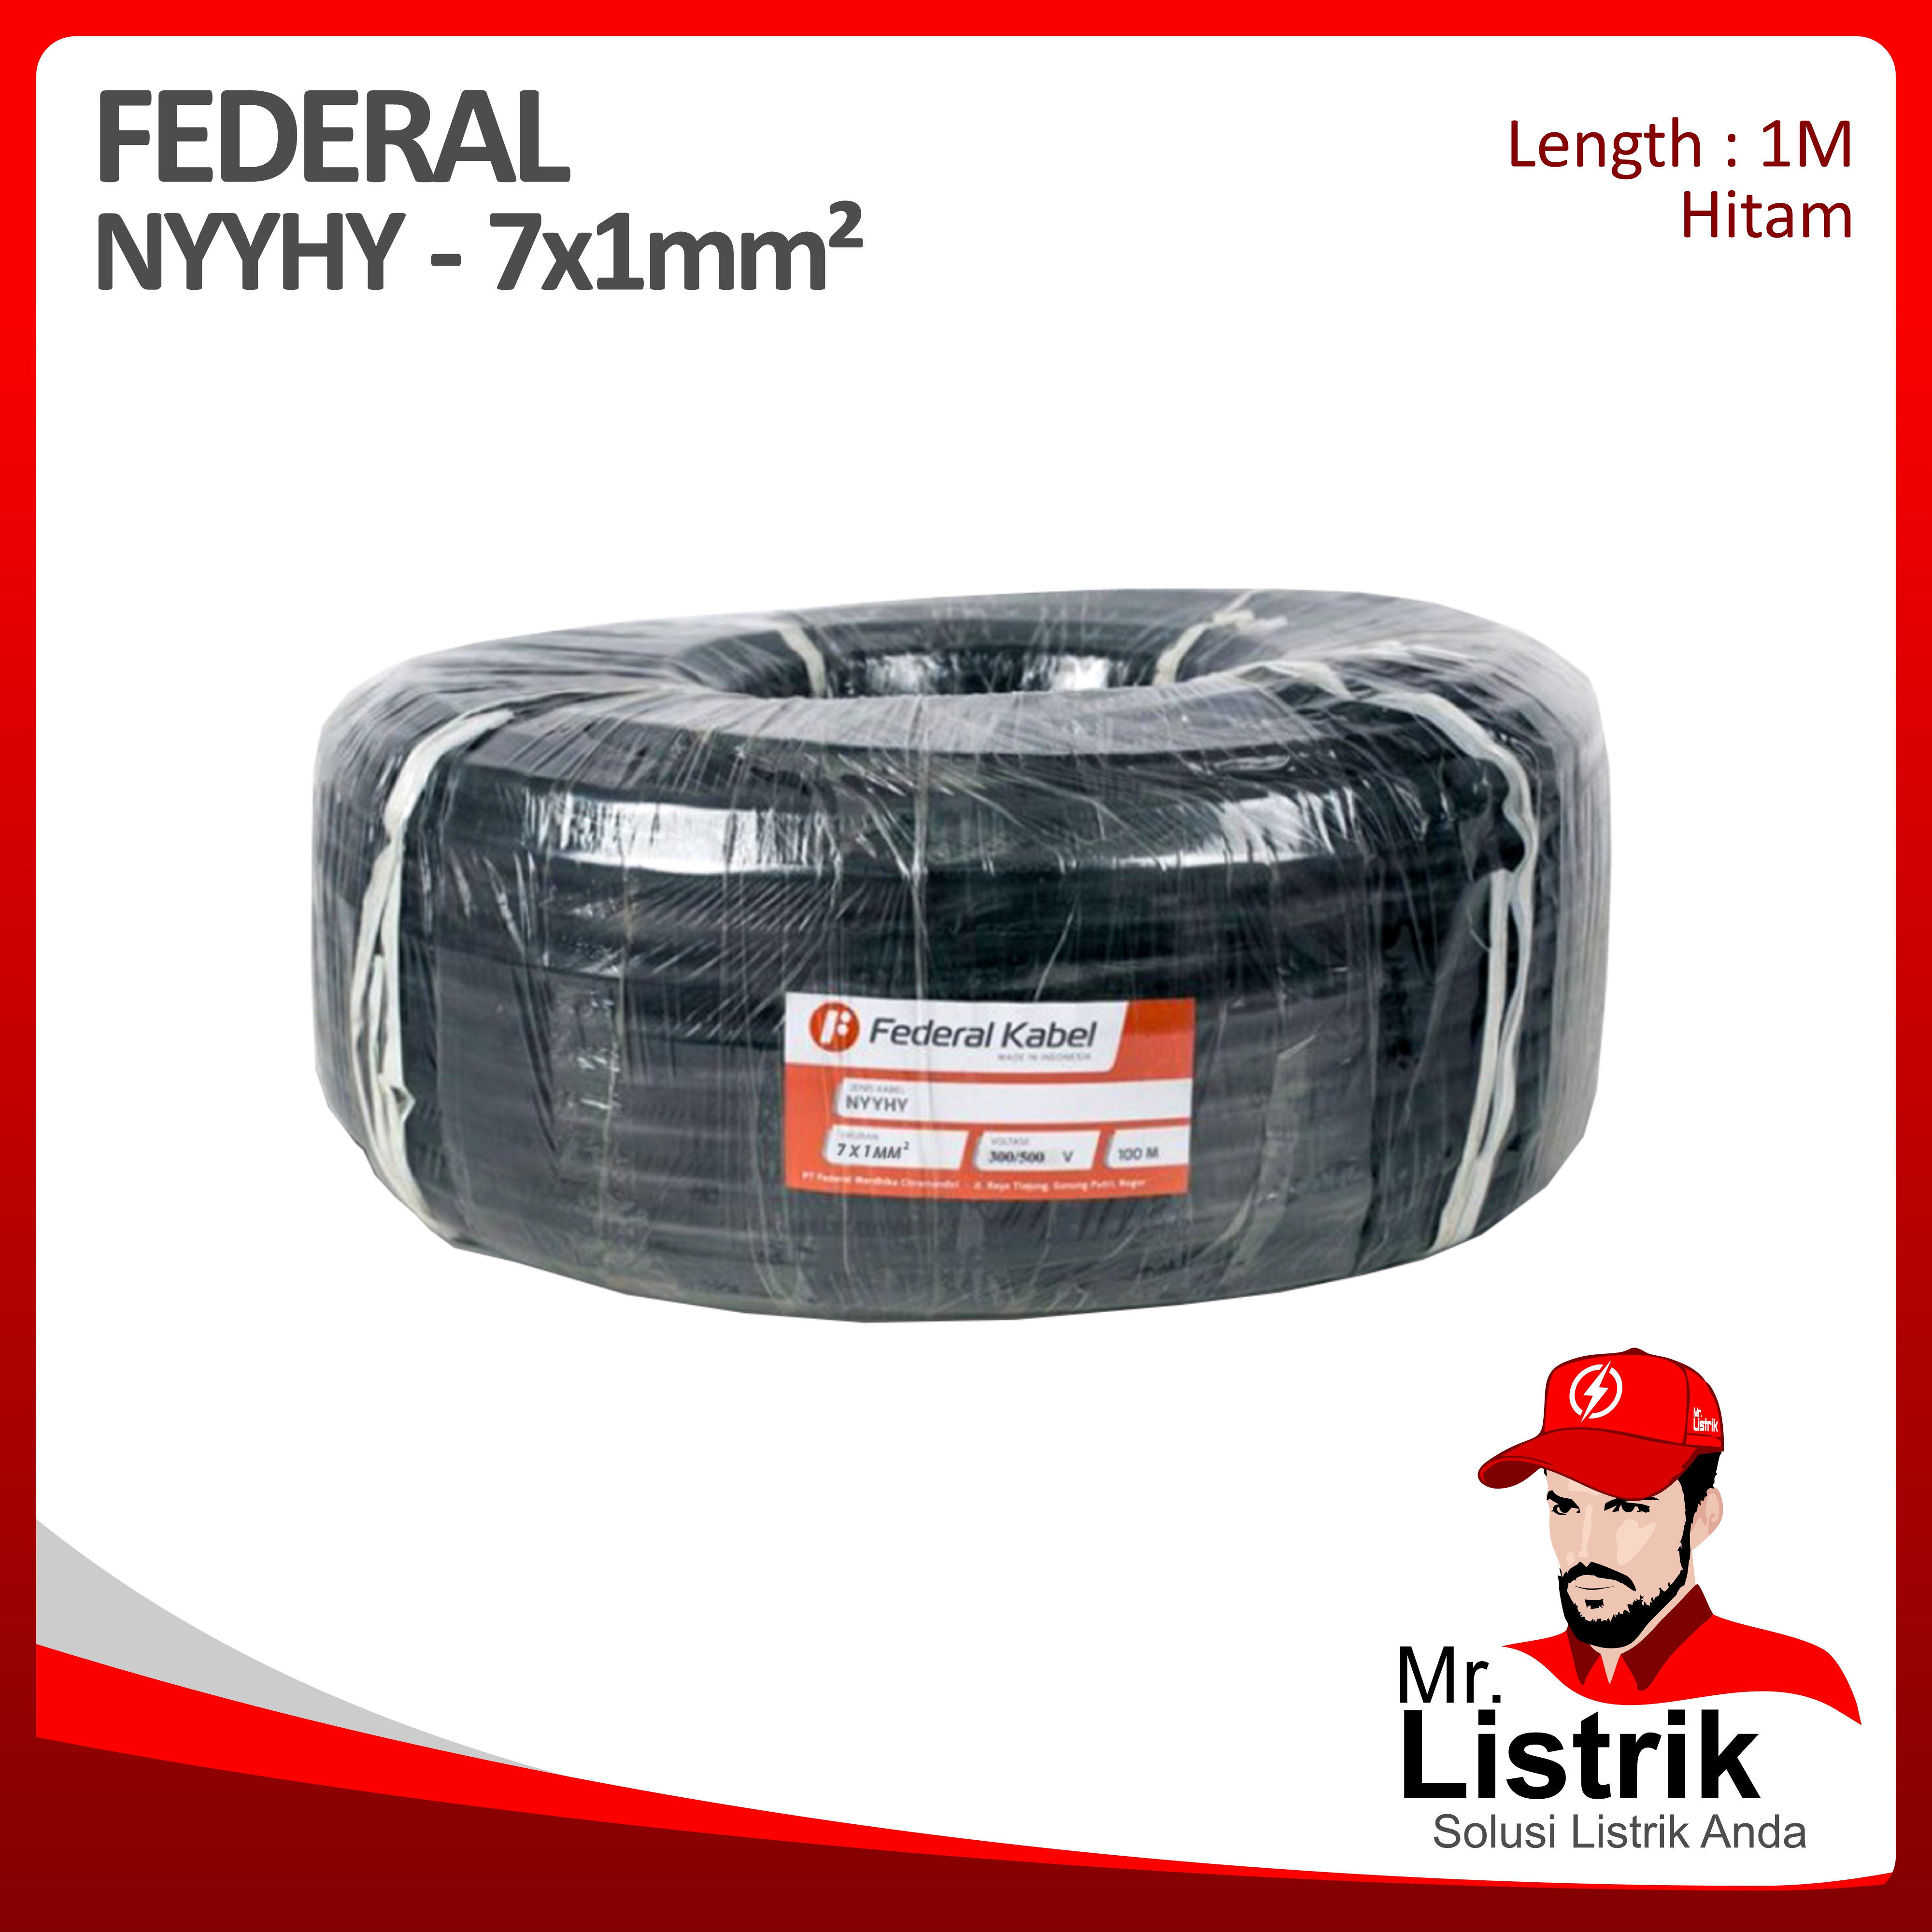 Kabel NYYHY Federal 7x1 mm² @1 Mtr